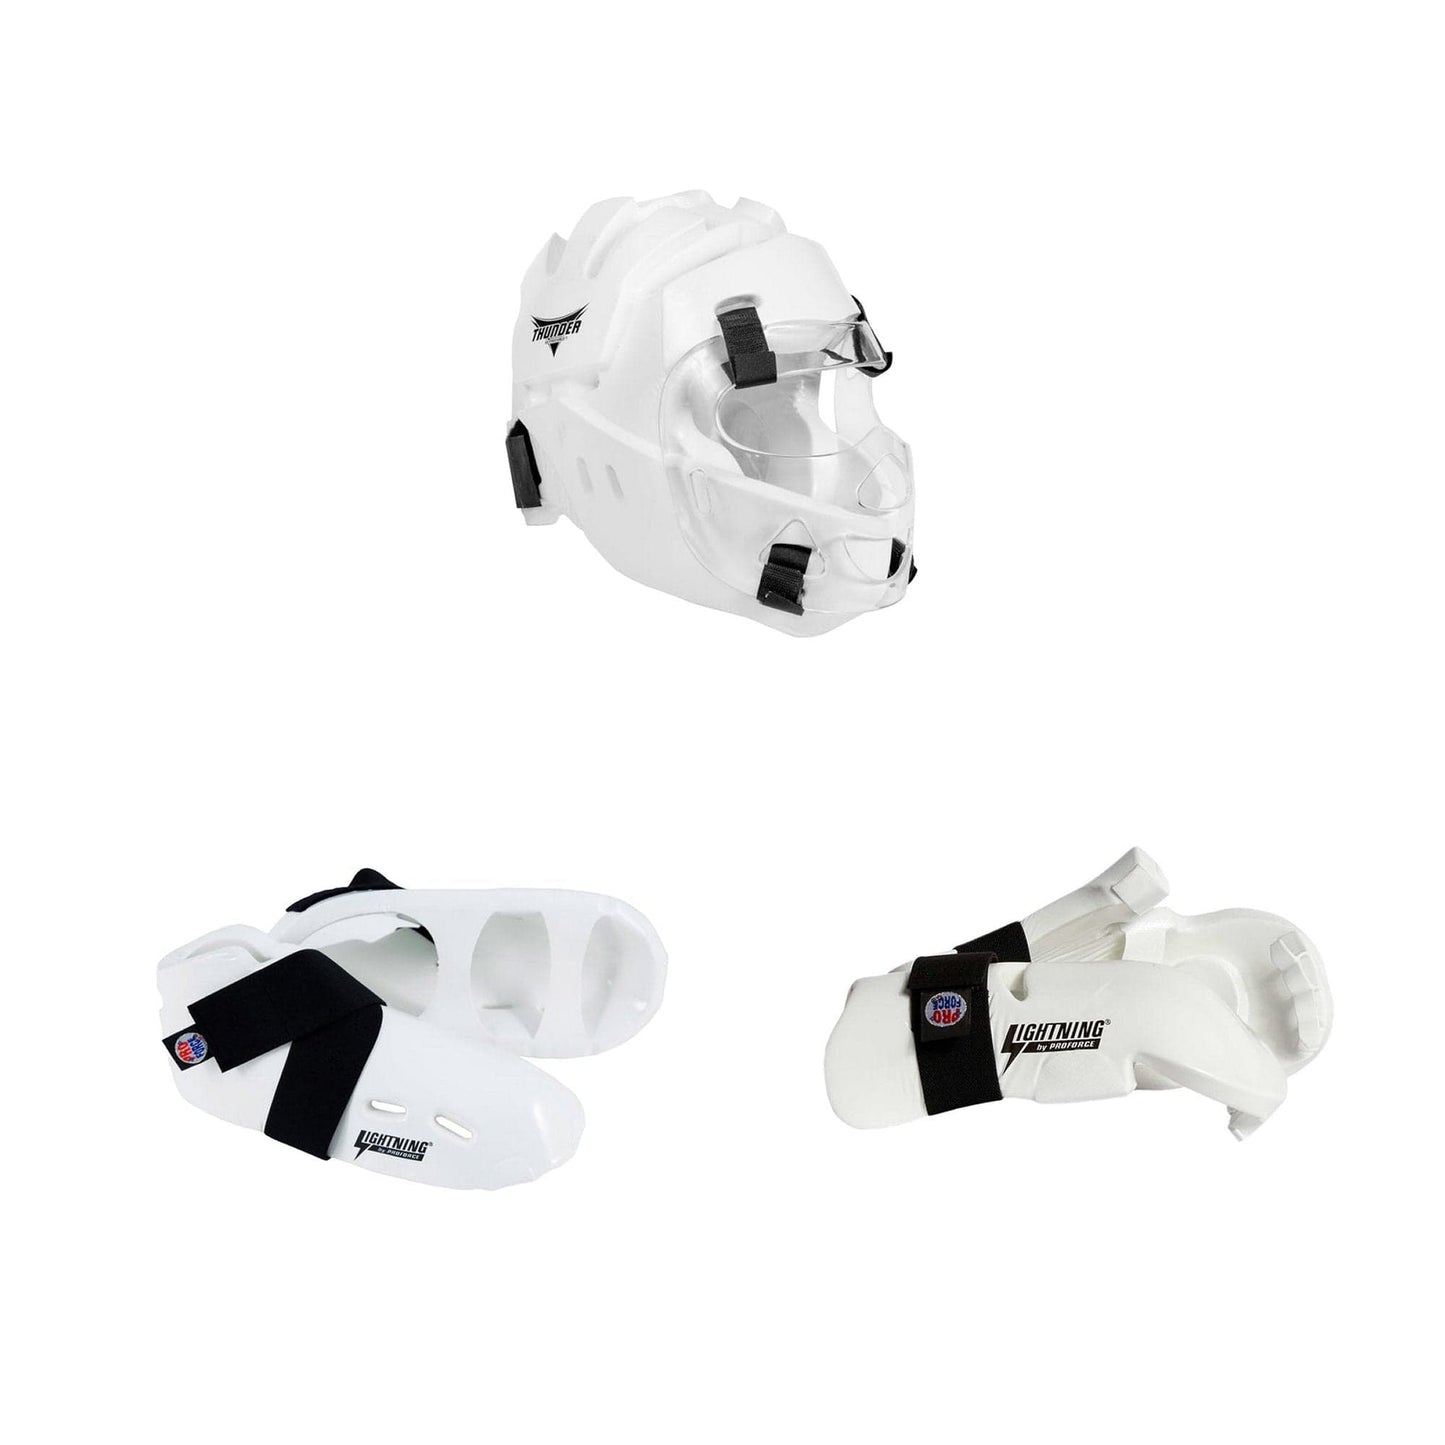 ProForce sporting goods ch xs/12-13 / Small ProForce 5 Piece Sparring Gear Combo Set White Full head face mask